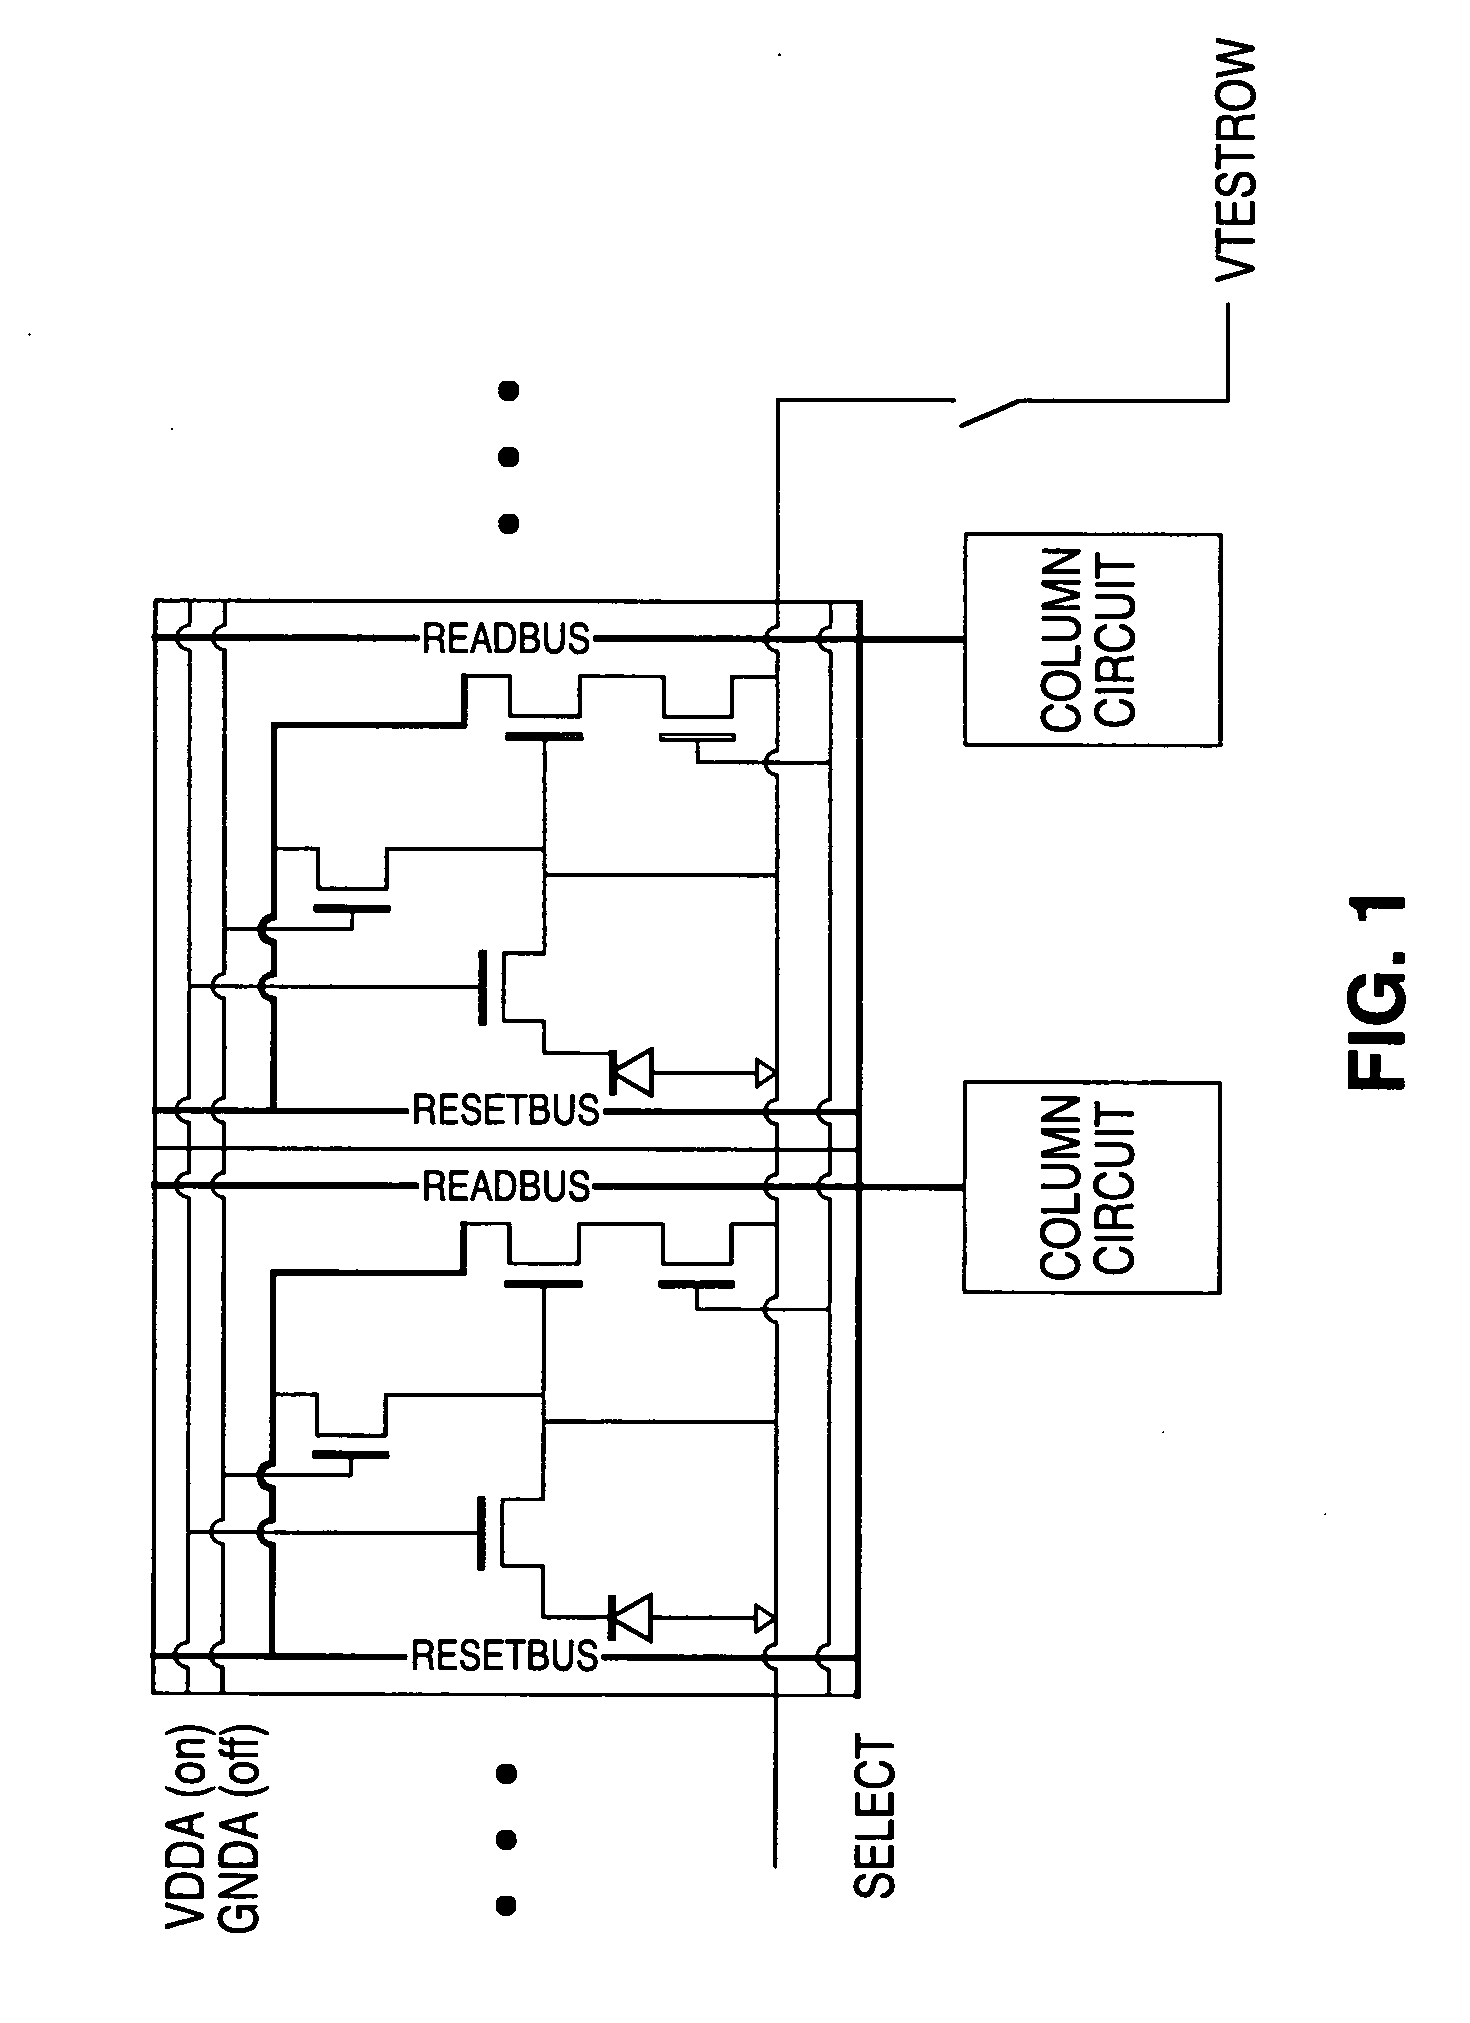 Apparatus and method for column fixed pattern noise (FPN) correction